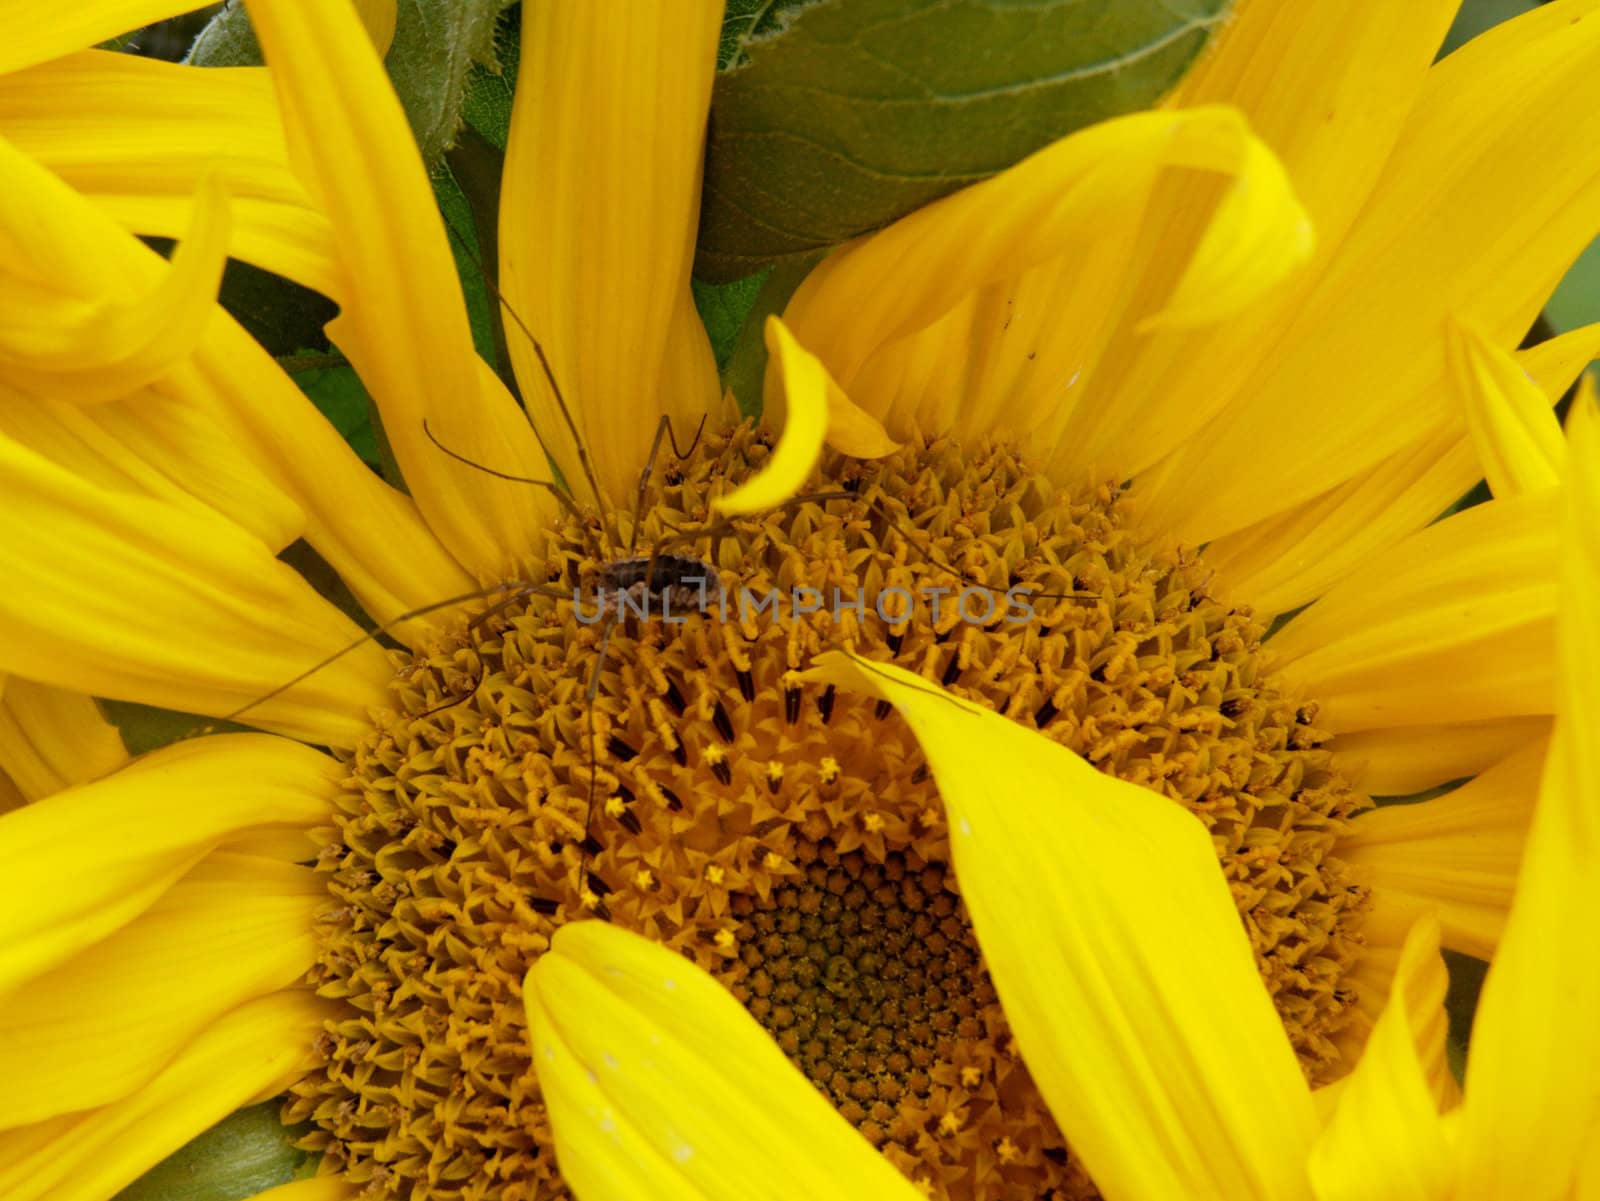 The image of the spider creeping on a sunflower